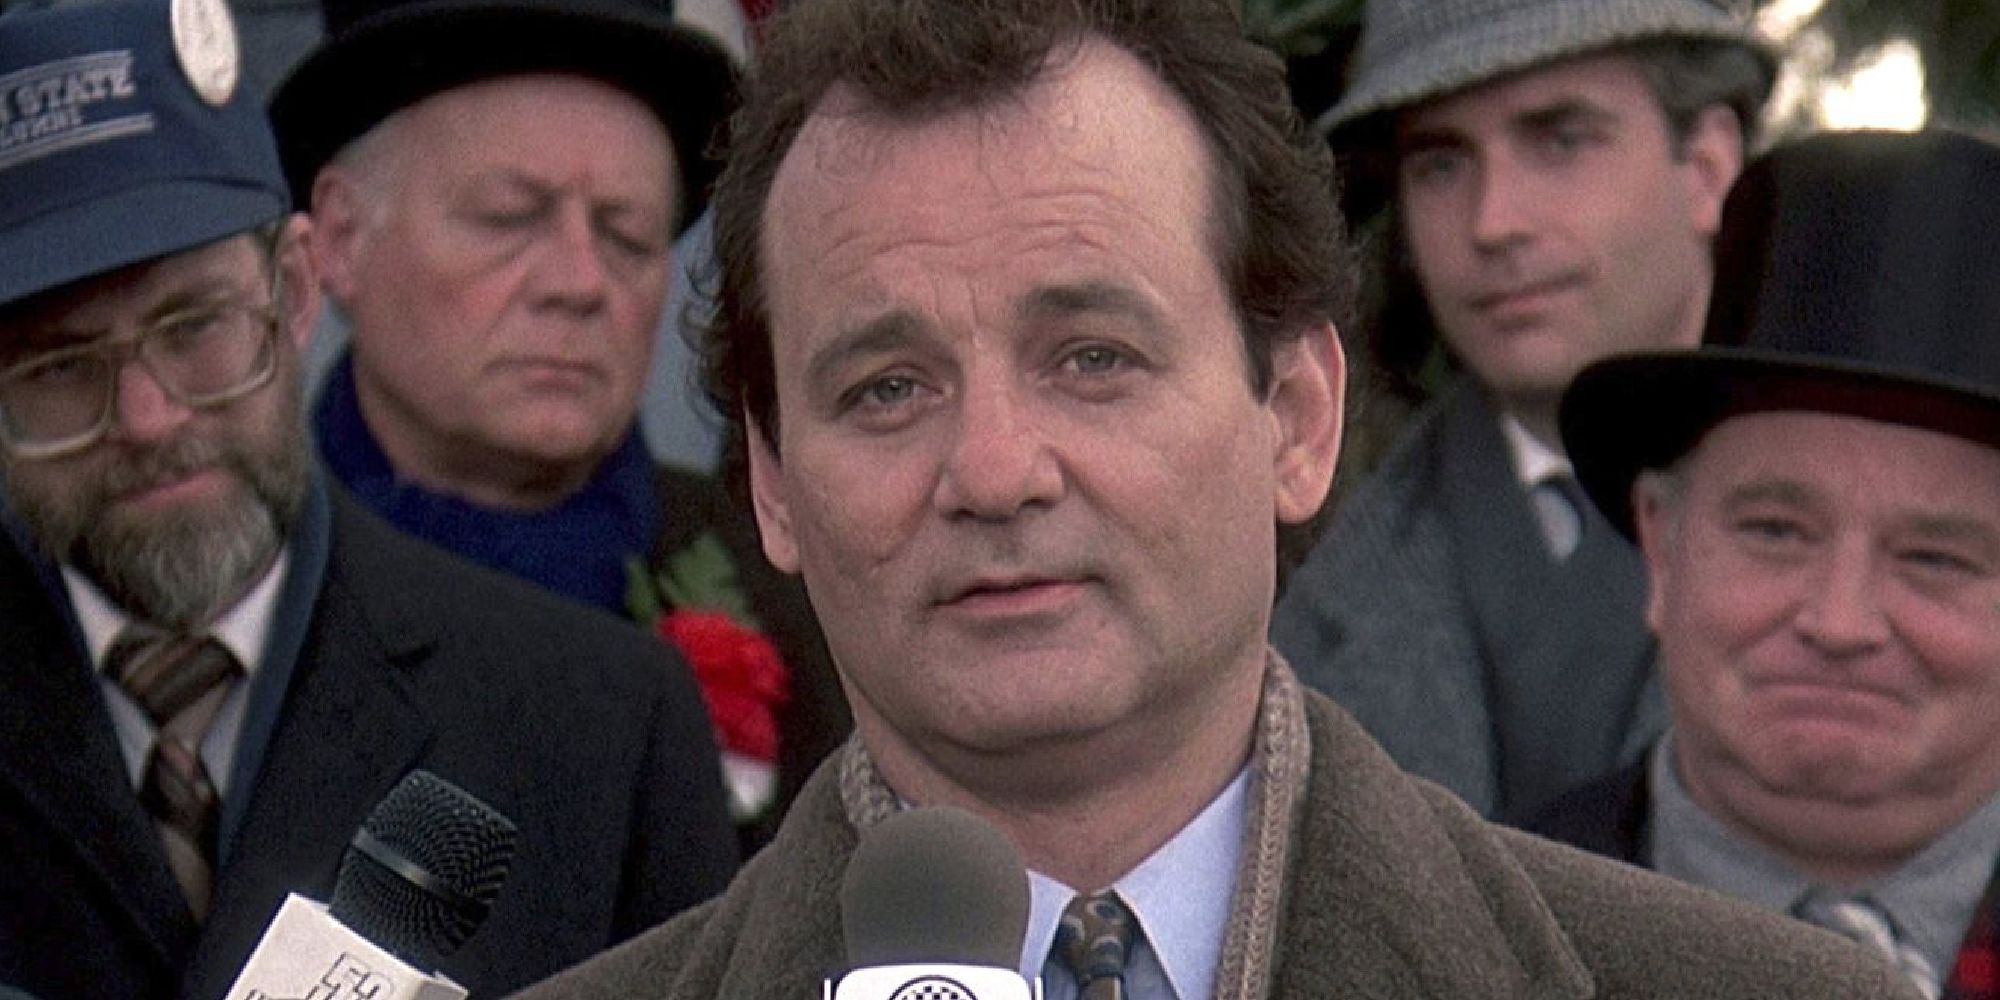 Bill Murray reporting the news in front of a crowd